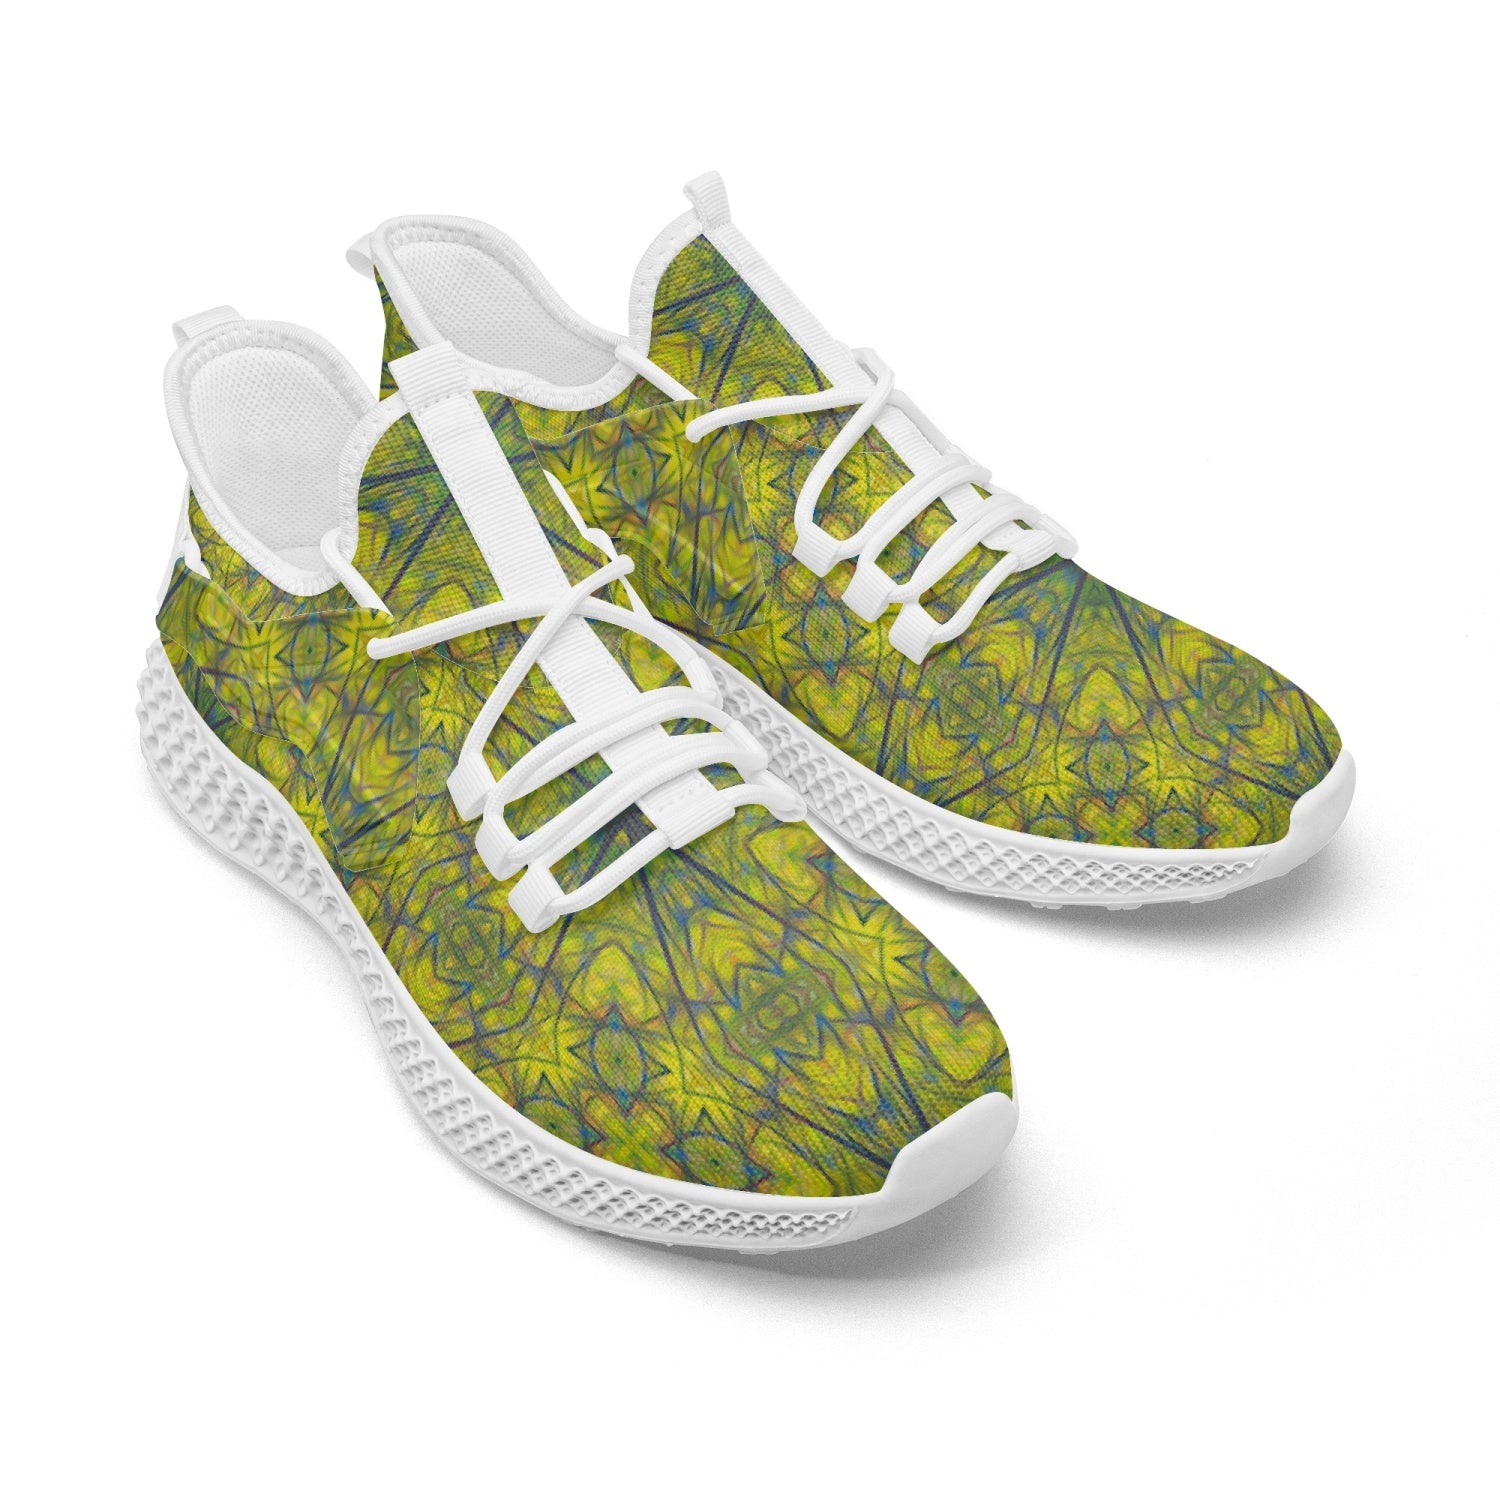 The Green Heart Chacra, Net Style Mesh Knit Sneakers, by Sensus Studio Design